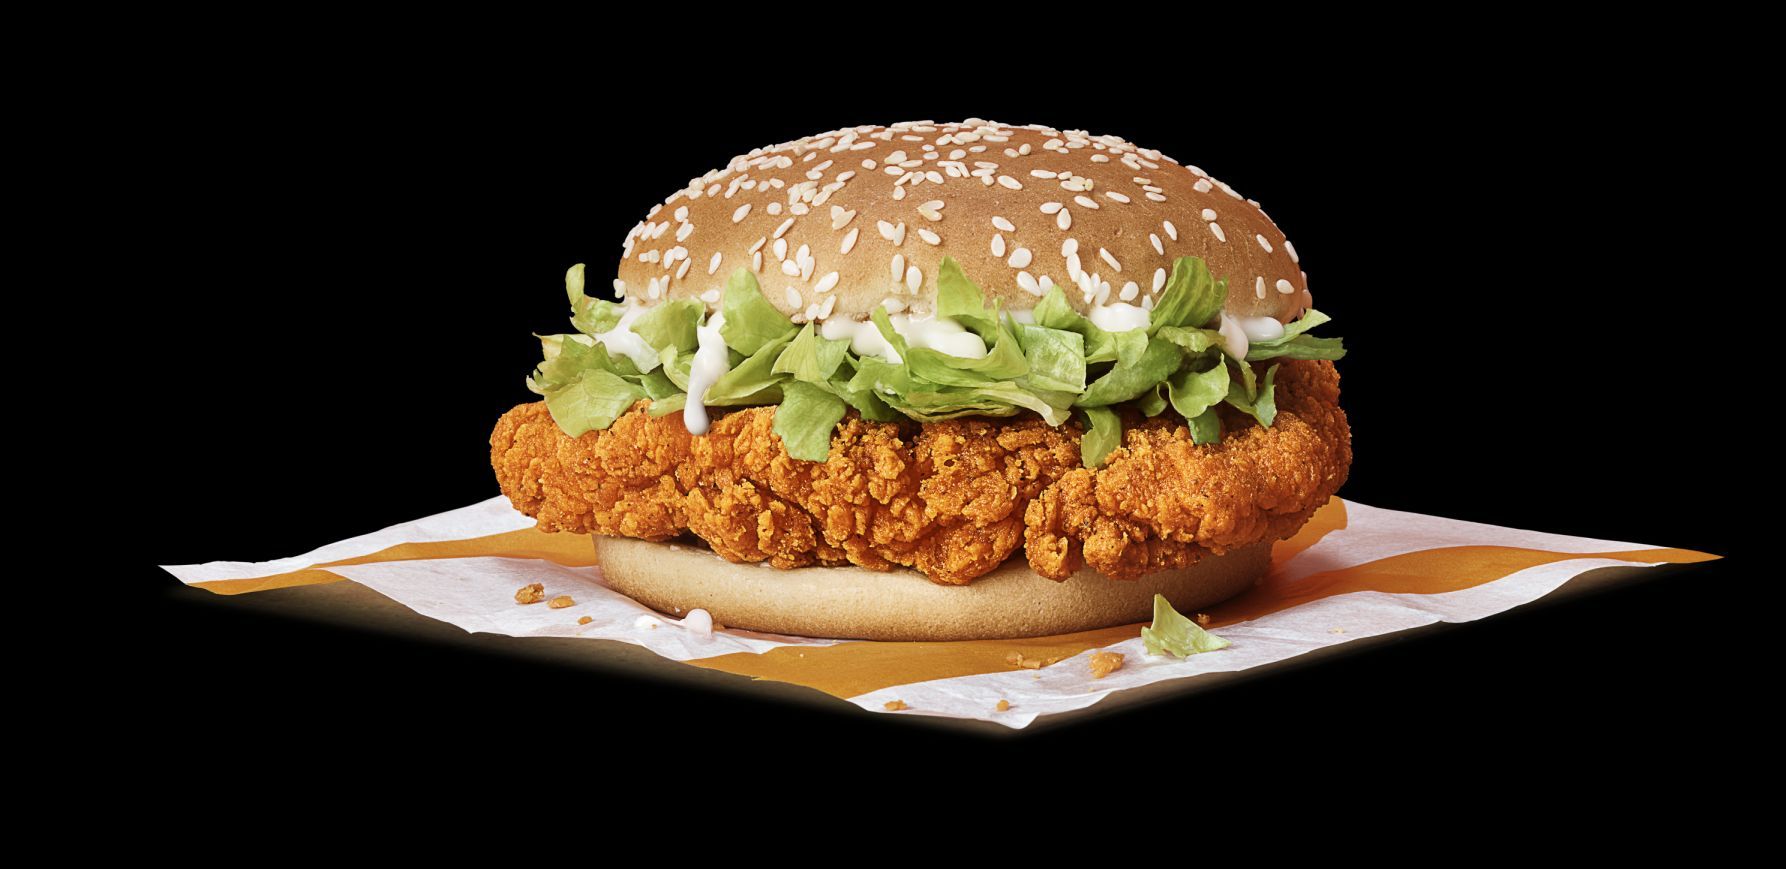 McDonald's is adding its hottest ever burger, the McSpicy, to their menu